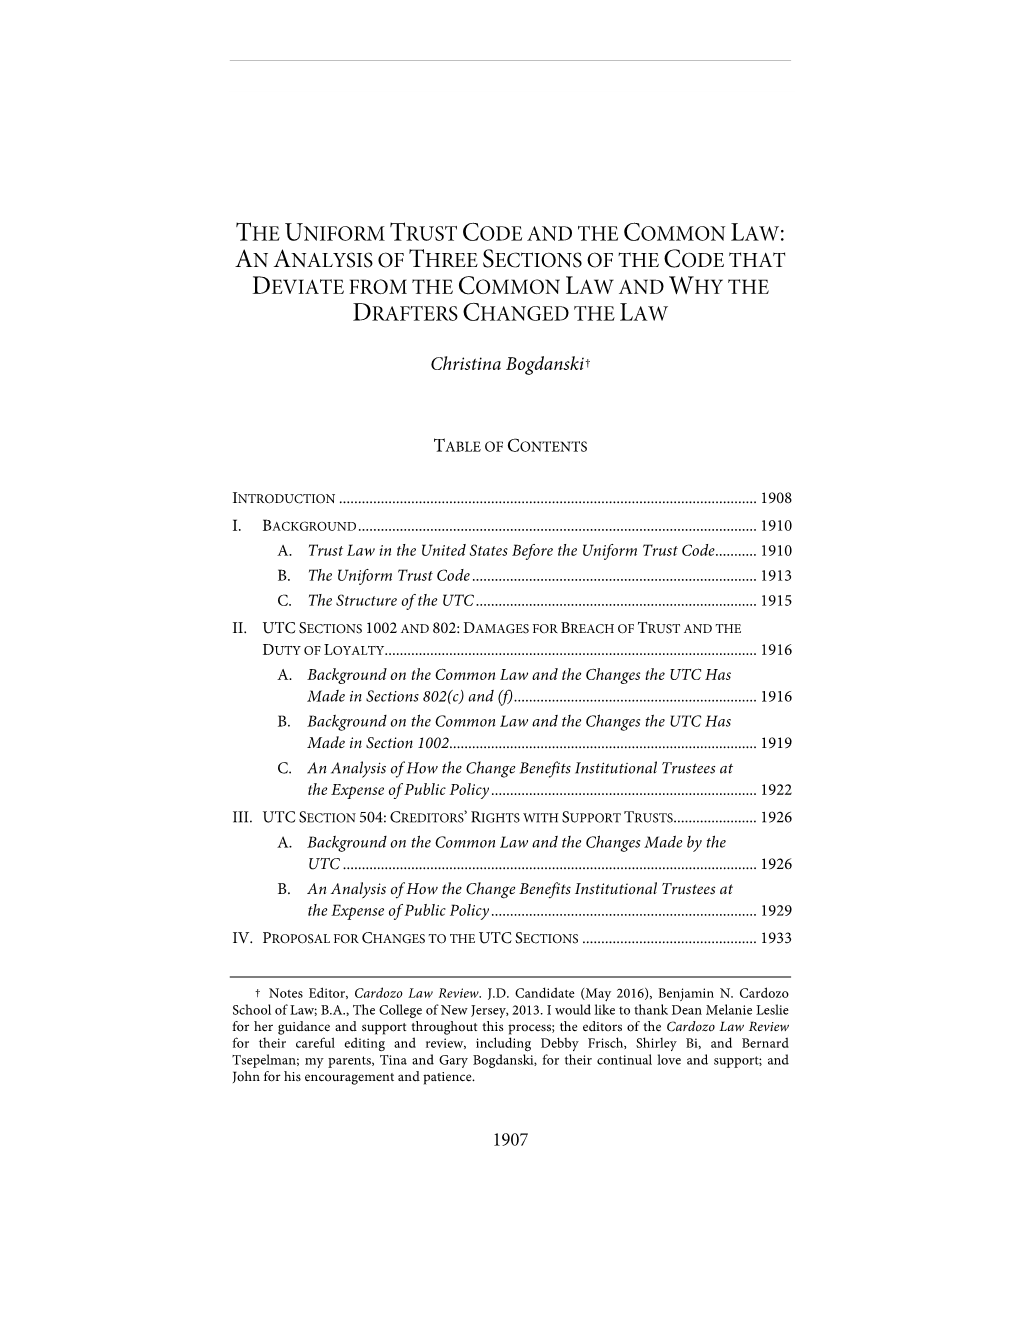 The Uniform Trust Code and the Common Law: an Analysis of Three Sections of the Code That Deviate from the Common Law and Why the Drafters Changed the Law